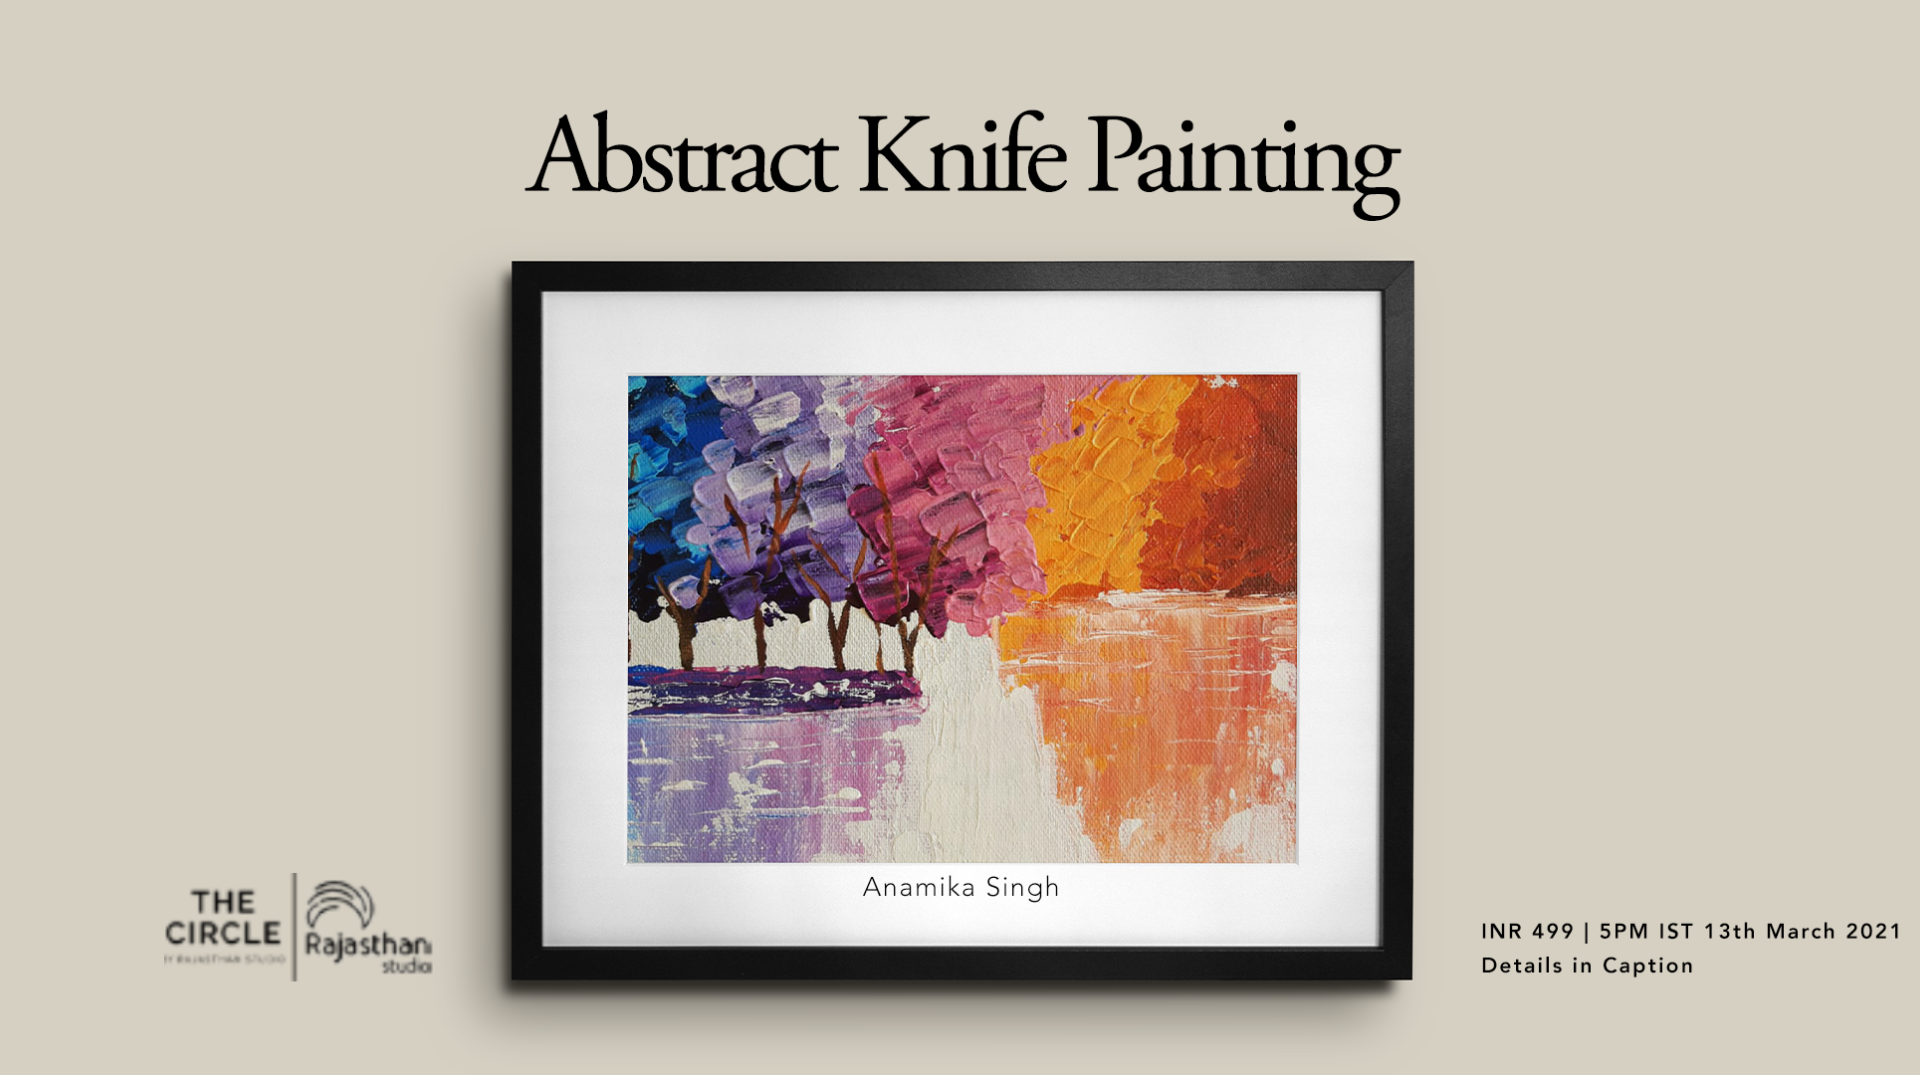 Abstract Knife Painting Workshop with Anamika Singh